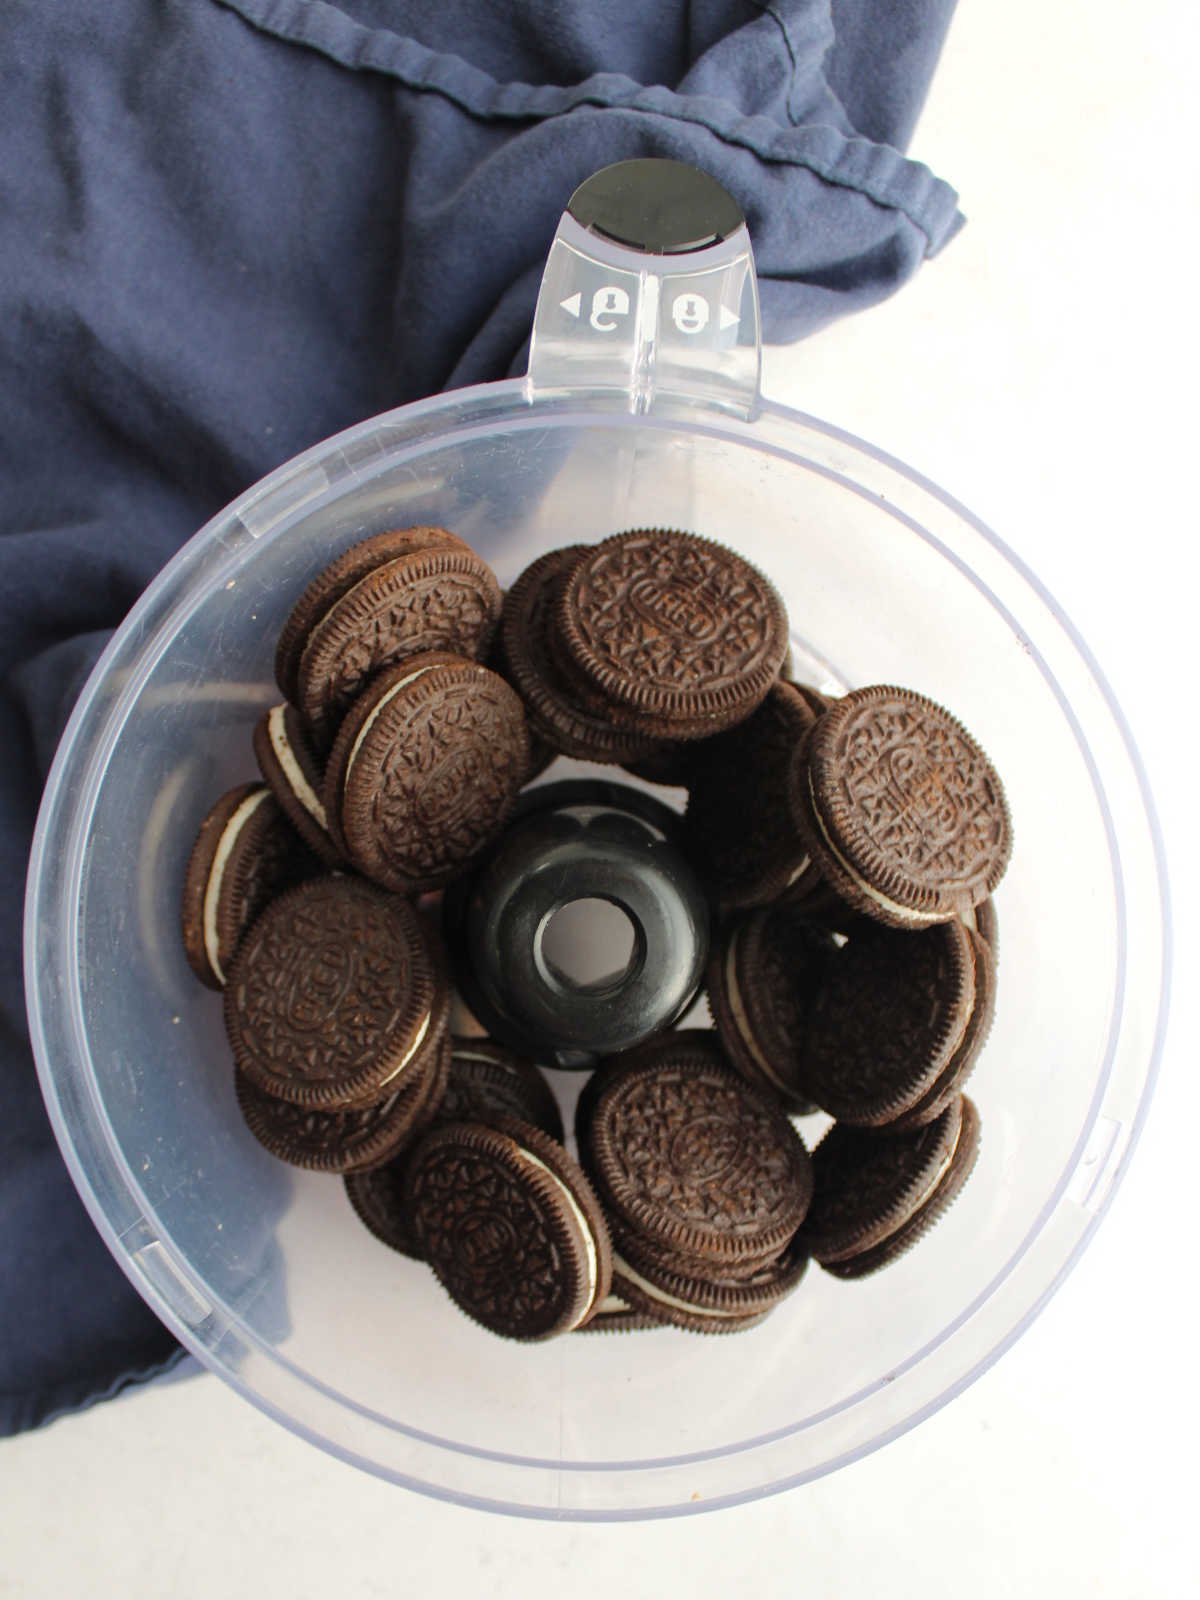 Whole Oreos in food processor, ready to be made into crumbs. 